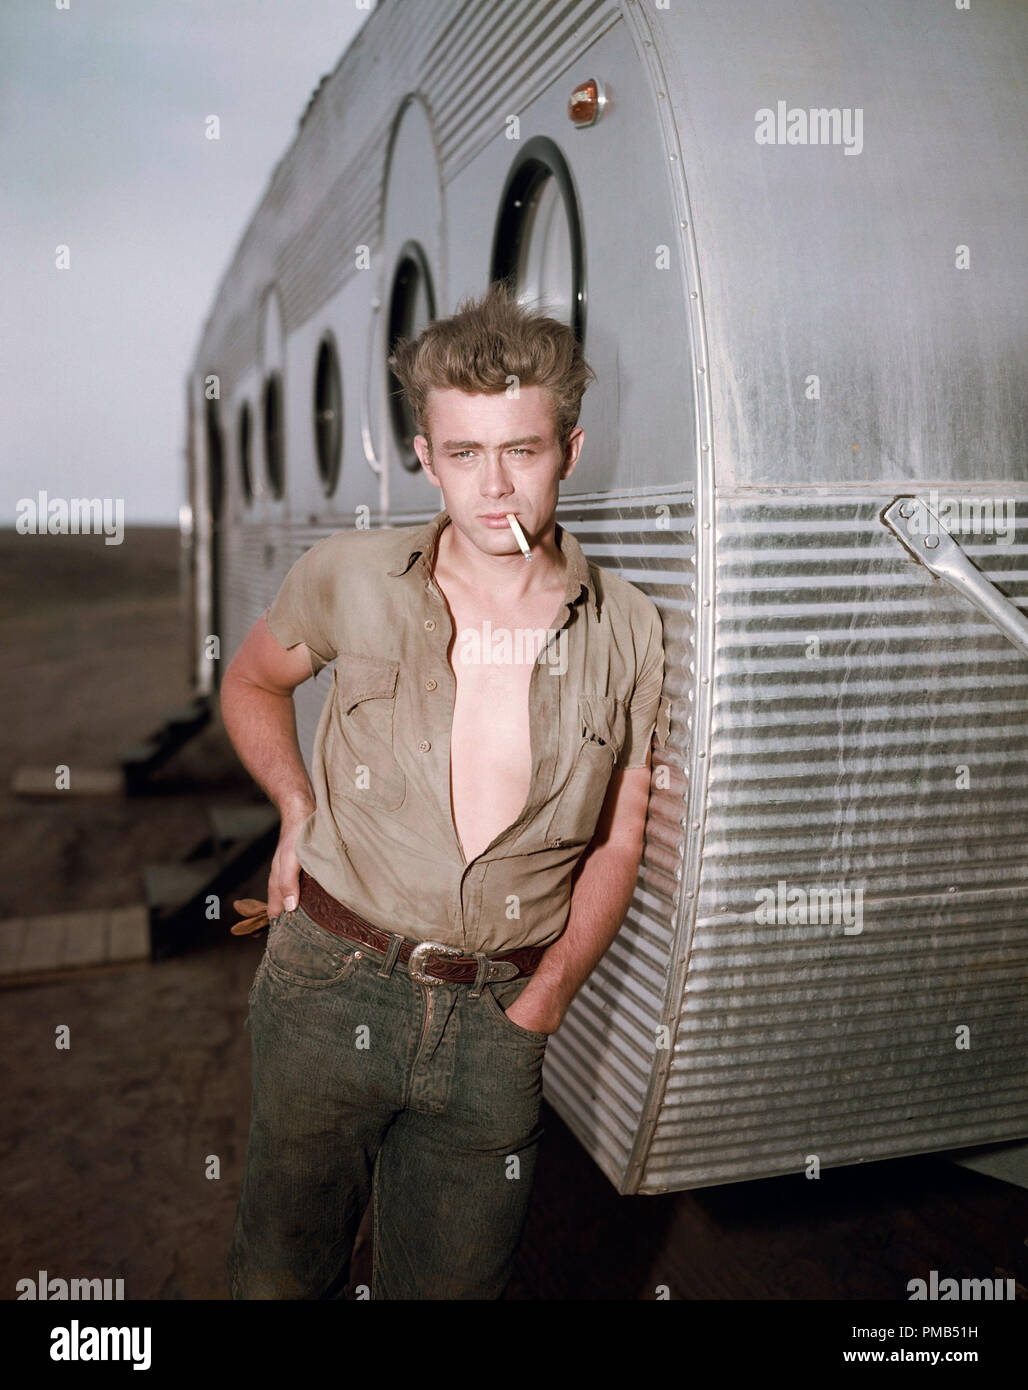 James Dean leaning against a dressing room trailer on the set of director George Stevens's film "Giant" 1955 Warner Bros.  File Reference # 33371_508THA Stock Photo